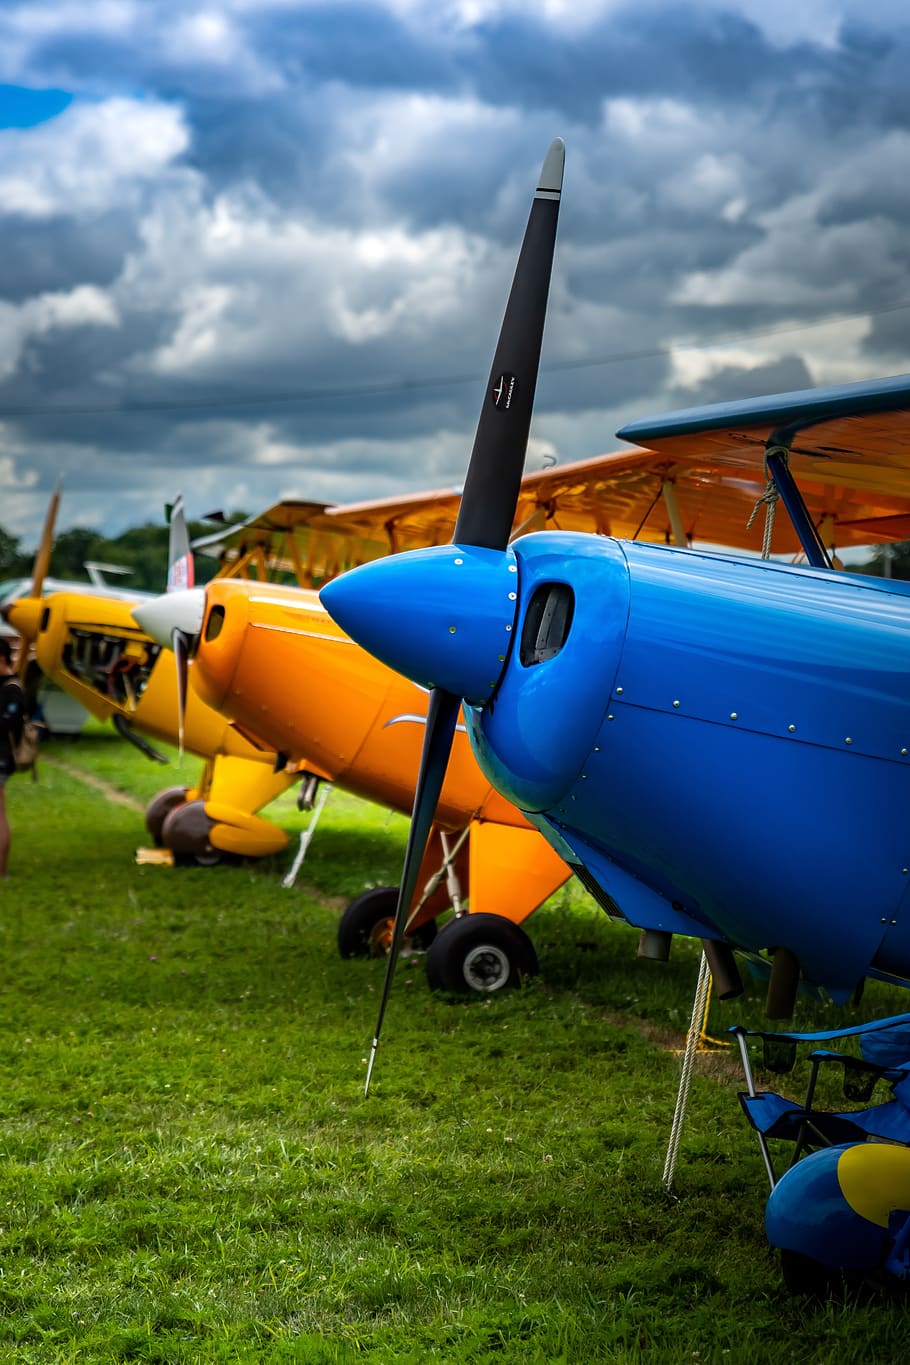 antique, aircraft, vintage, propeller, old, classic, retro, airshow, airport, air vehicle